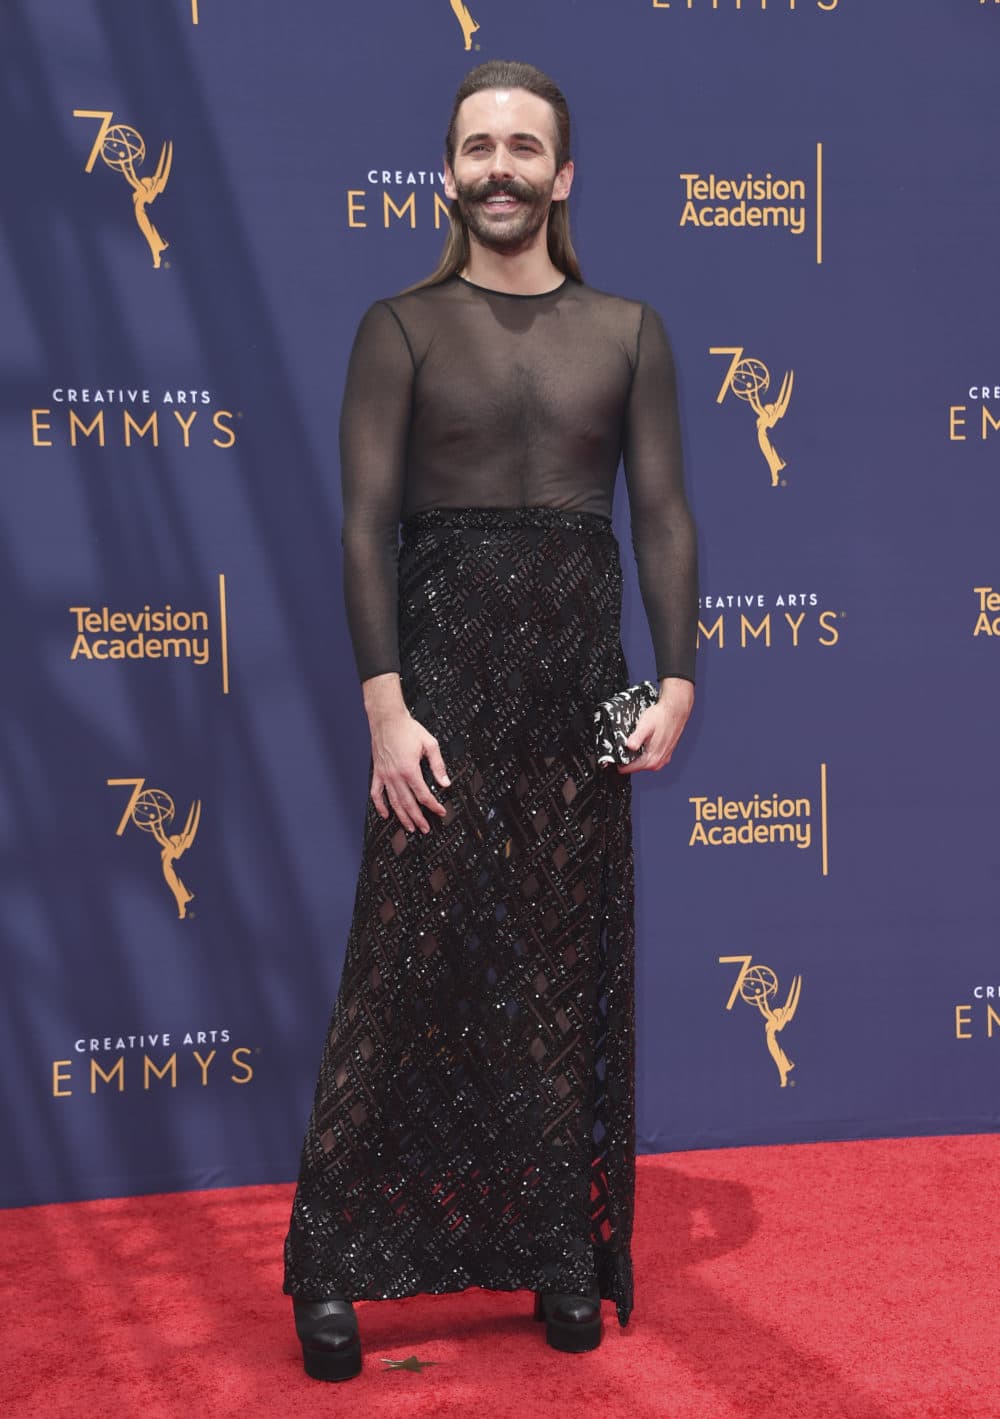 Jonathan Van Ness arrives at night two of the Creative Arts Emmy Awards on Sunday, Sept. 9, 2018, in Los Angeles. (Richard Shotwell/Invision/AP)